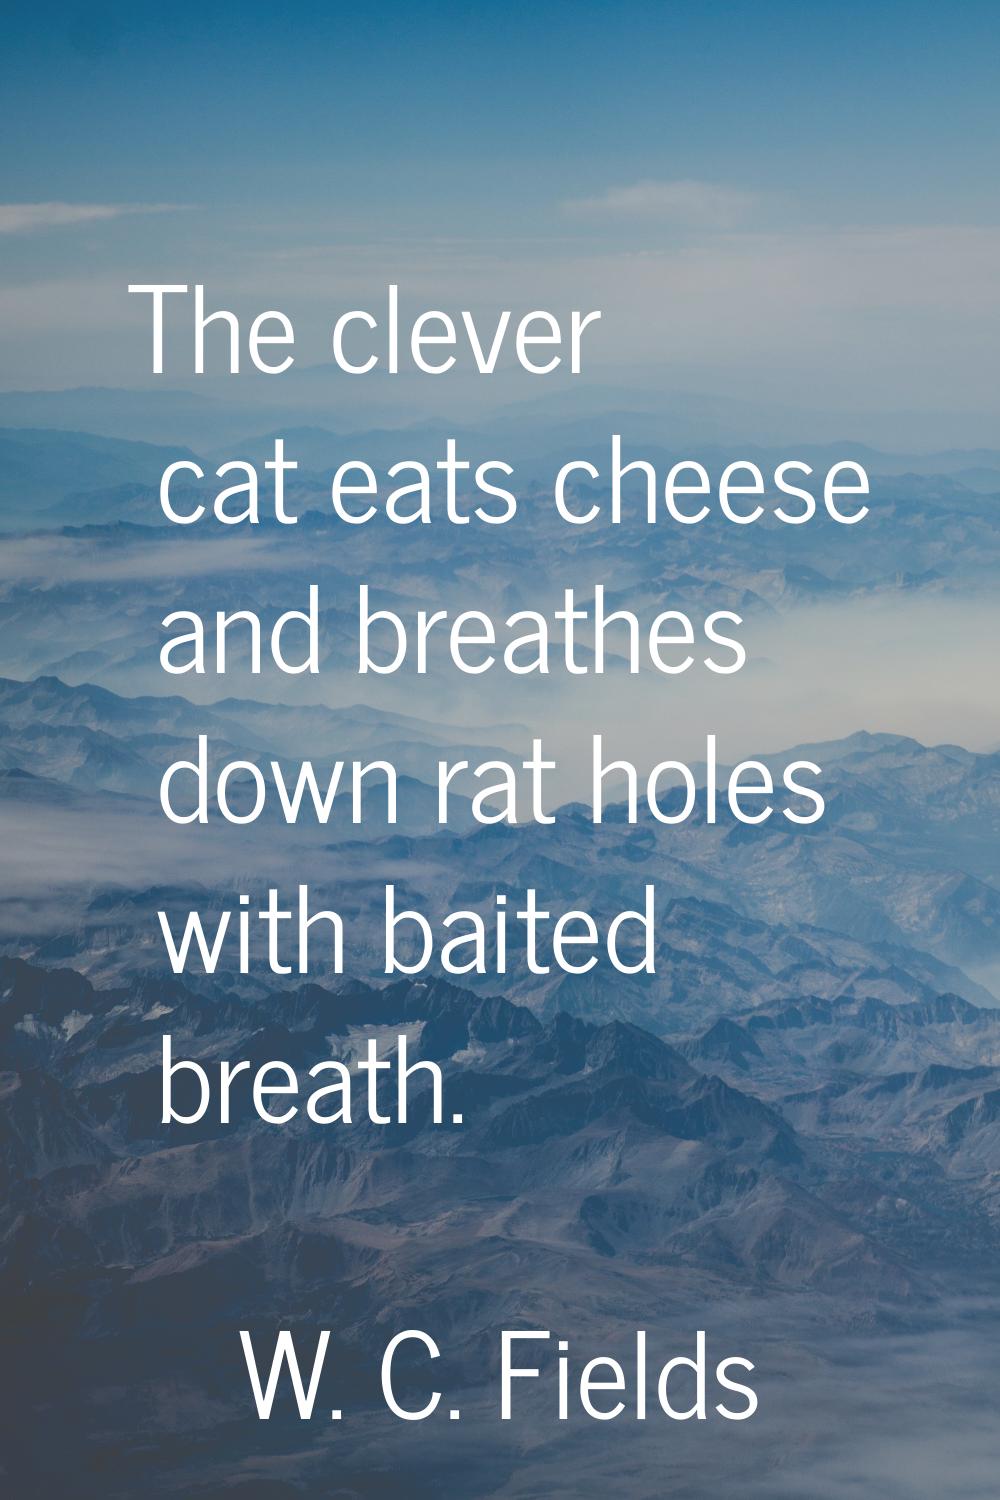 The clever cat eats cheese and breathes down rat holes with baited breath.